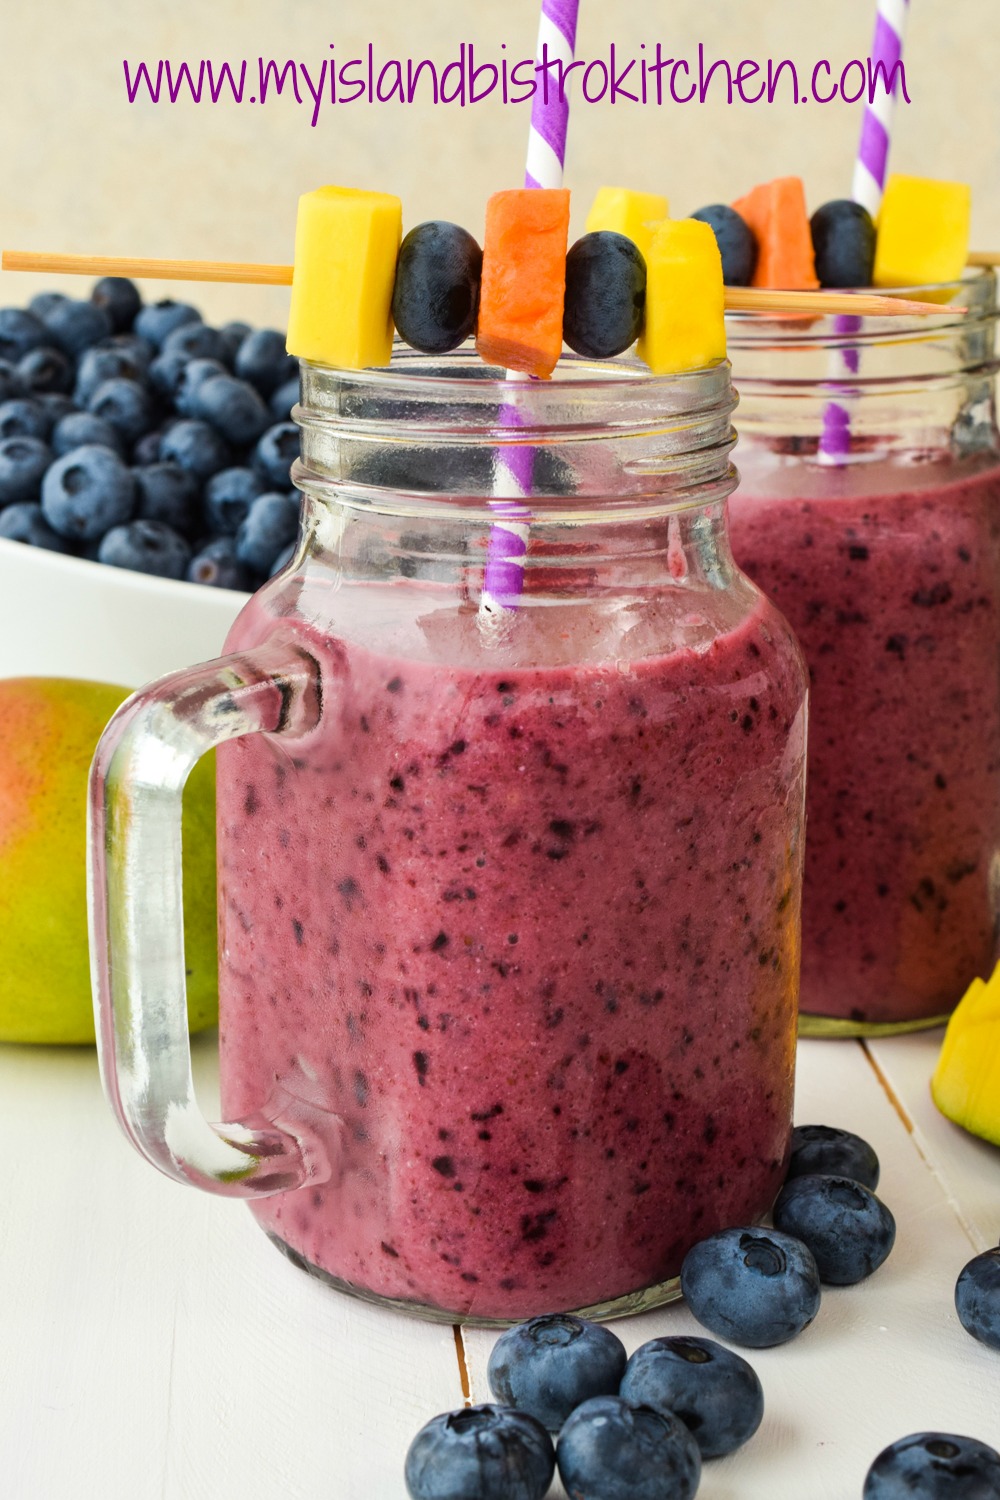 Blueberry and Tropical Fruit Smoothie